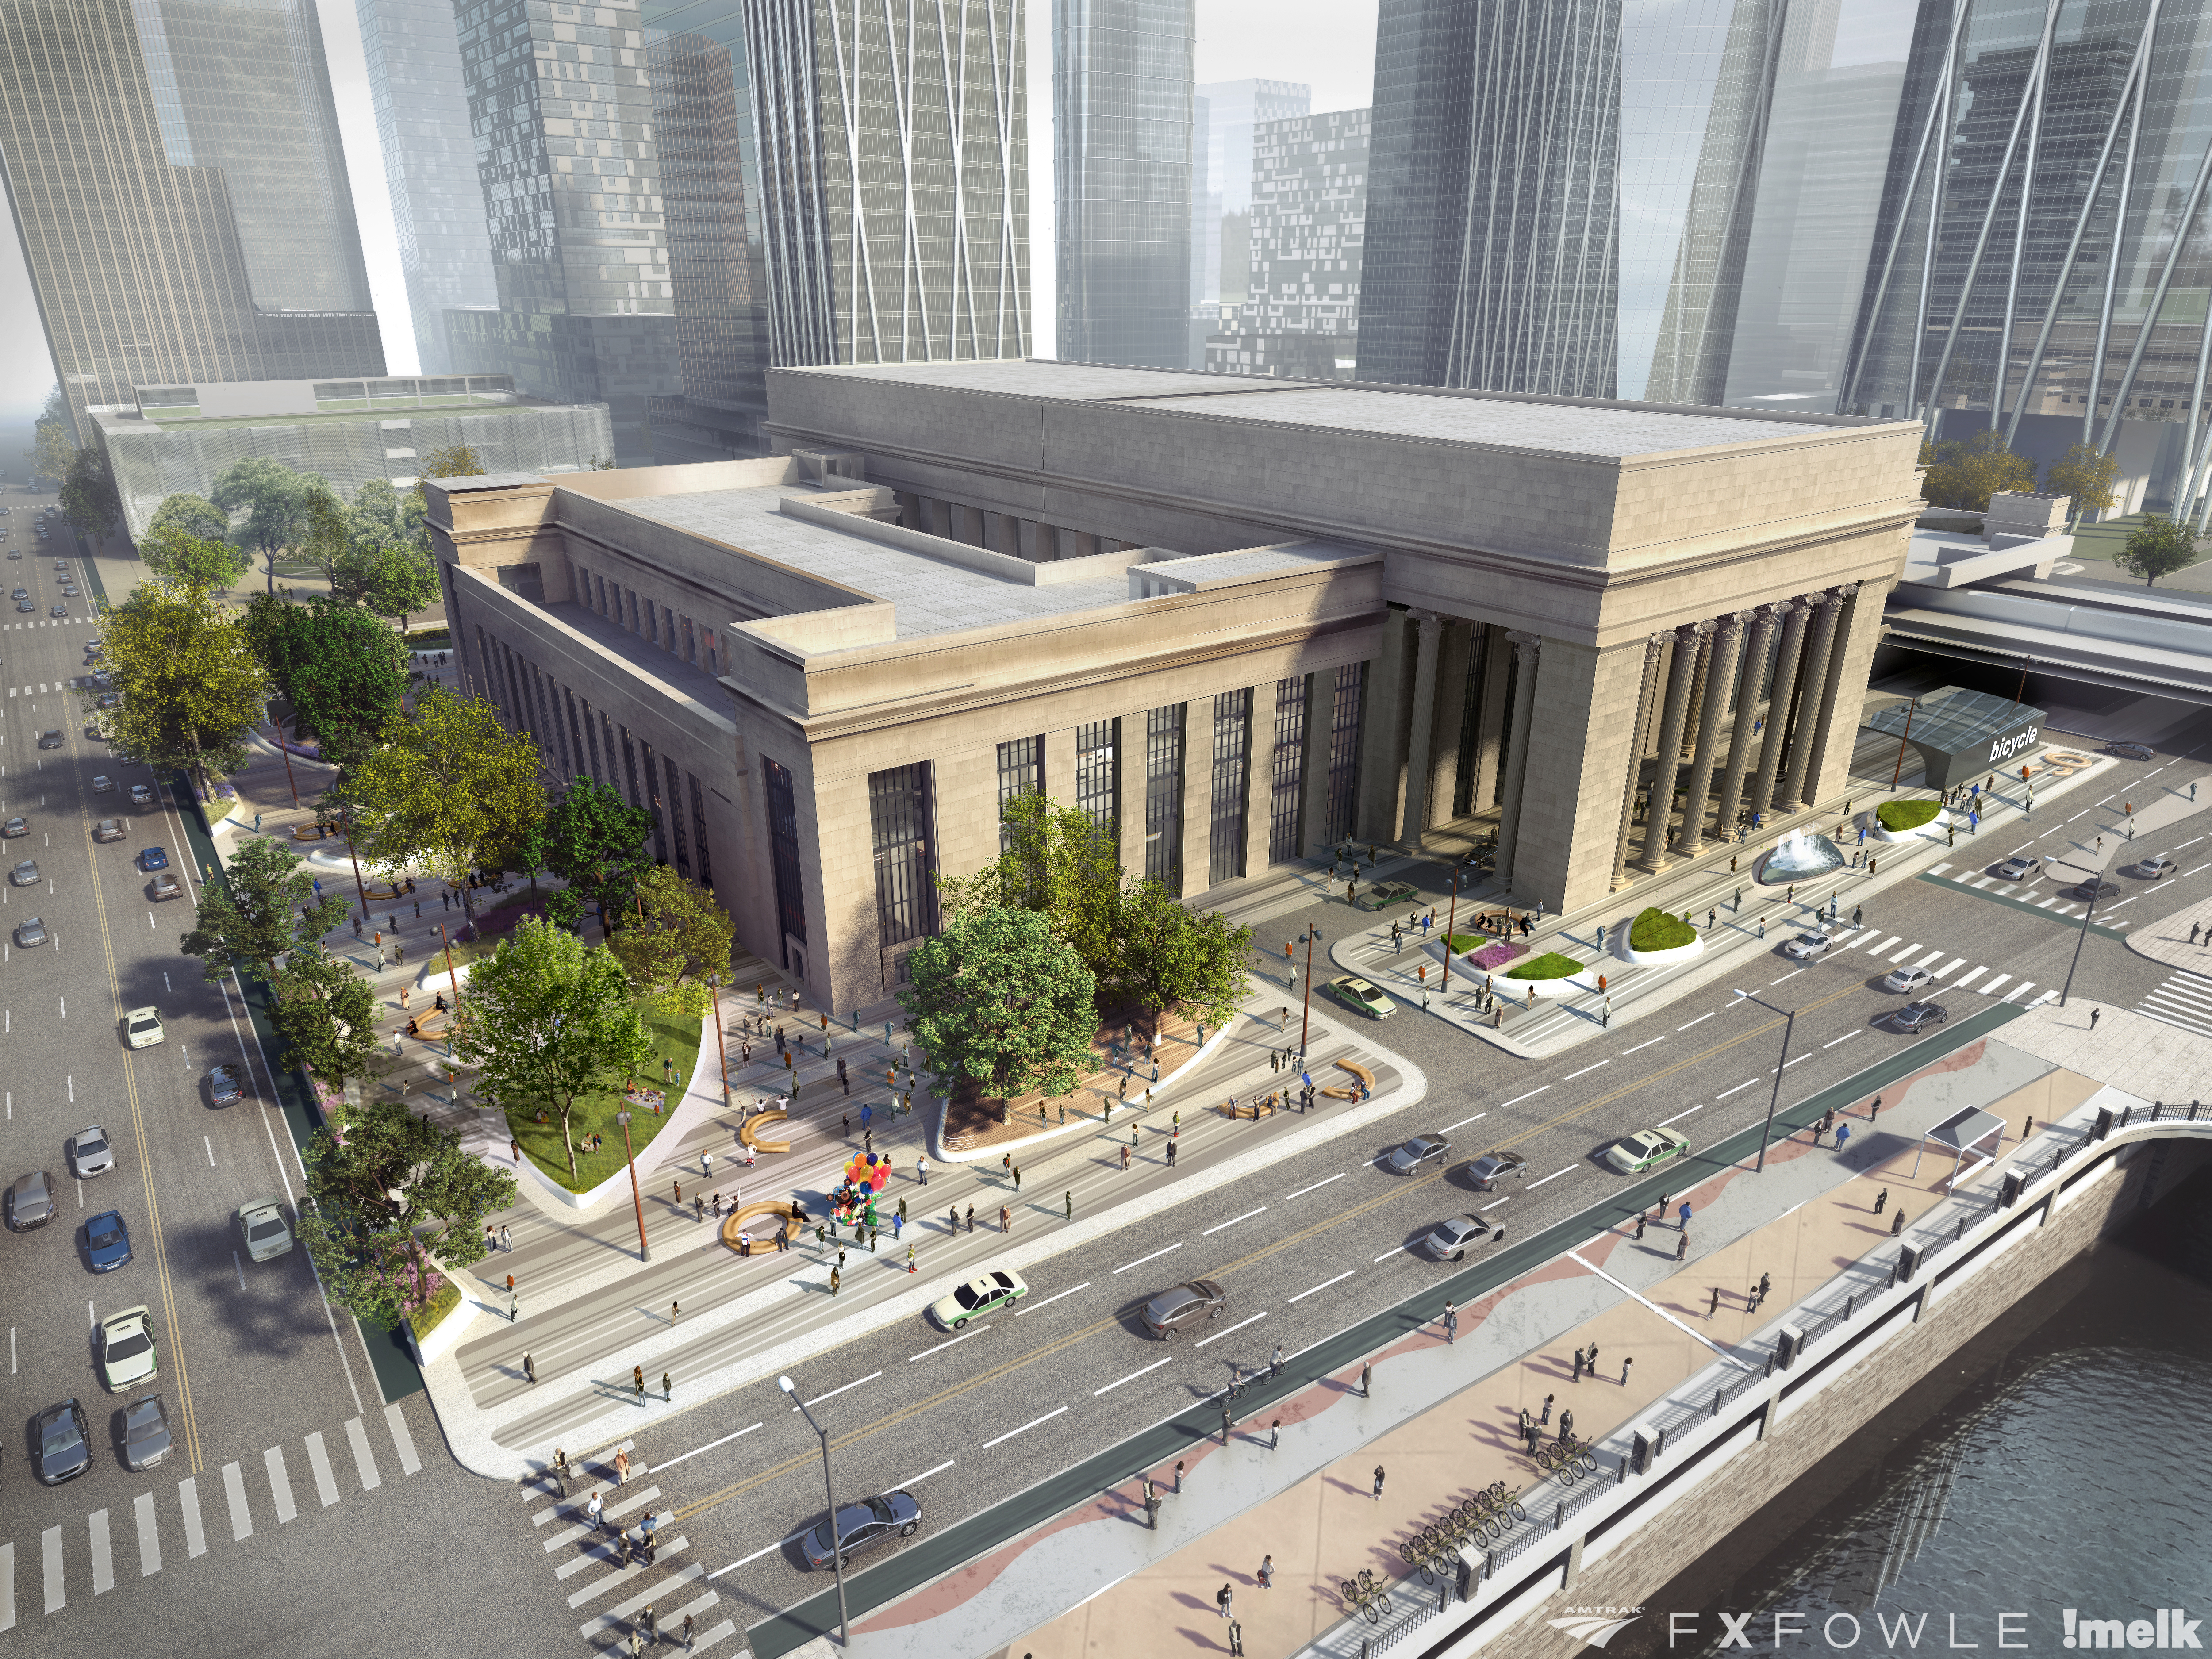 A rendering of 30th Street Station in Philadelphia. The station has tall windows and a tan facade. There are trees and roads in front of the building.